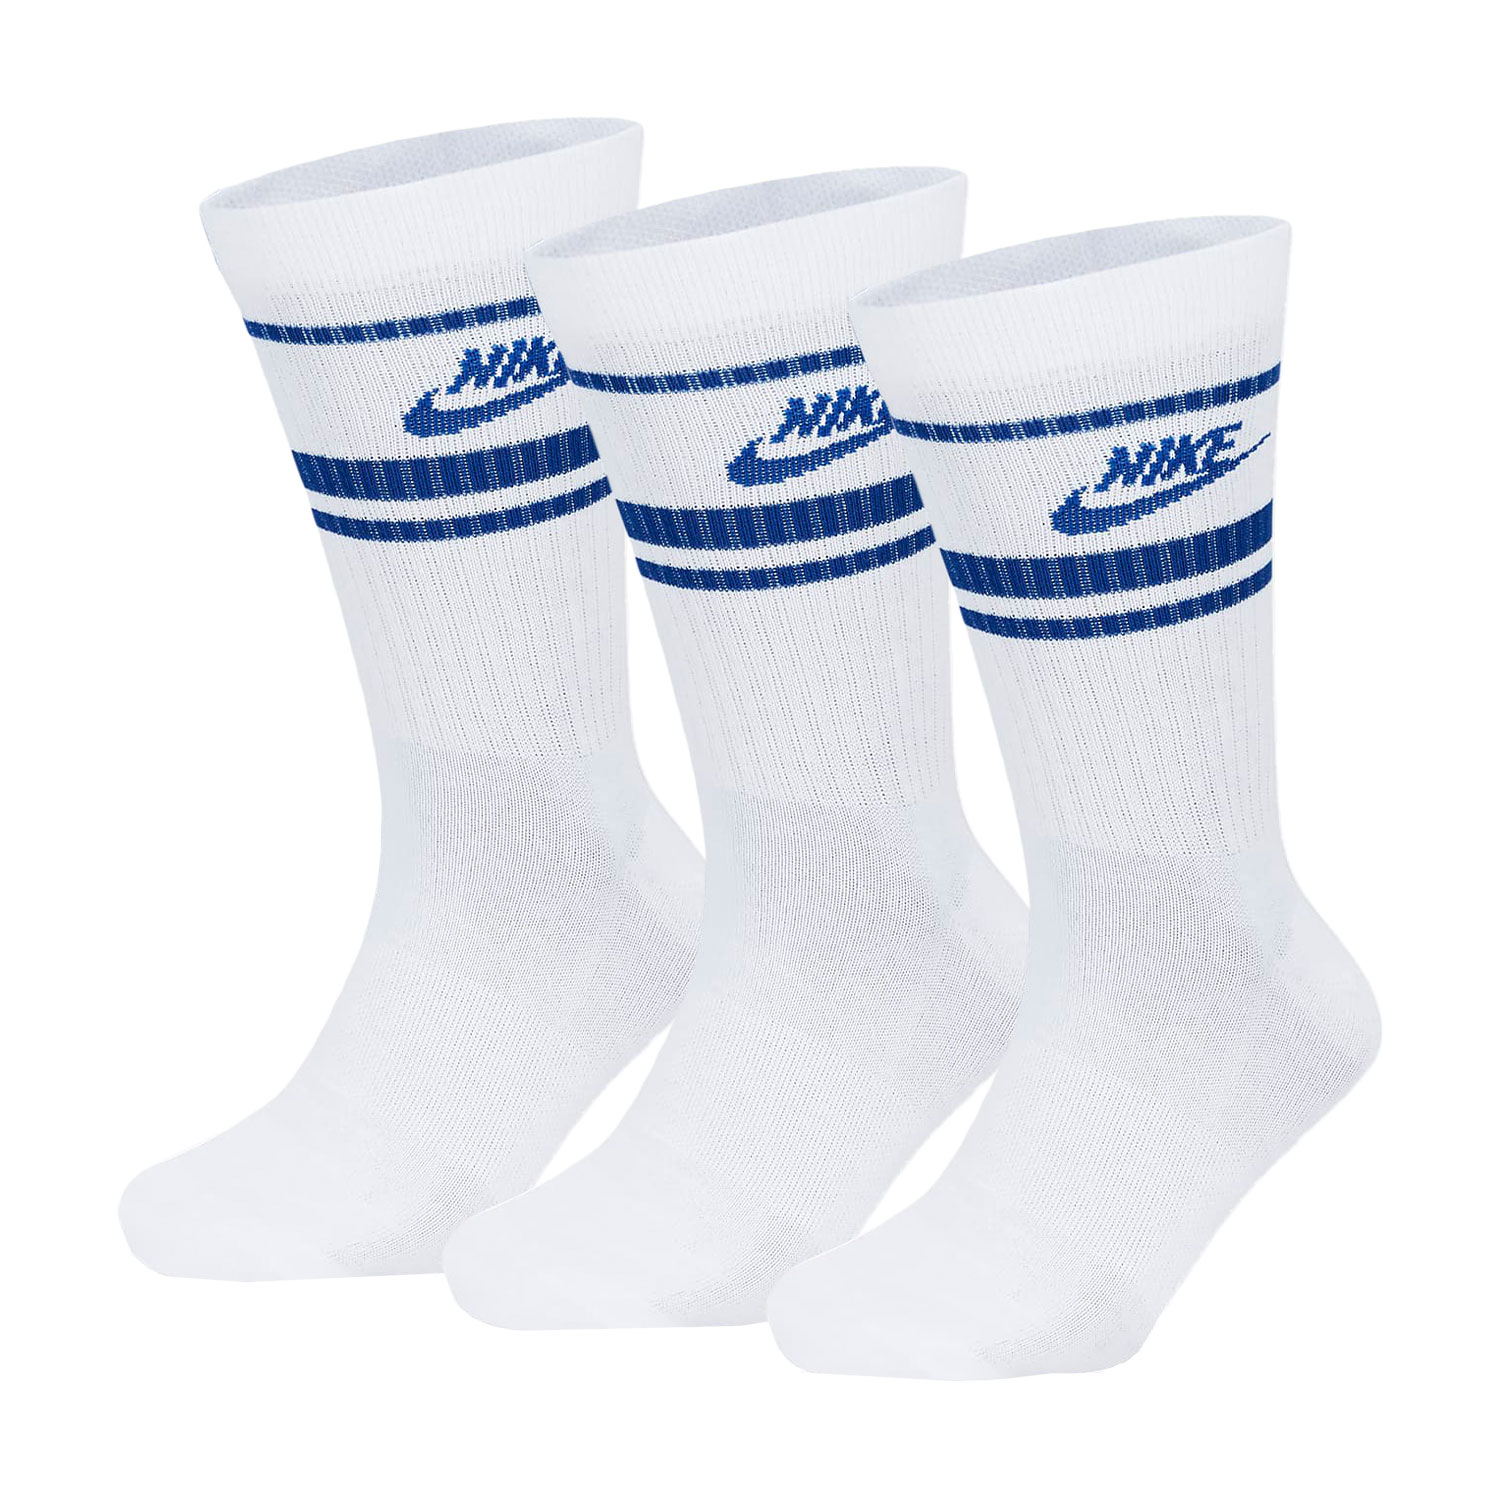 Nike Sportswear Everyday Essential x 3 Calcetines - White/Game Royal